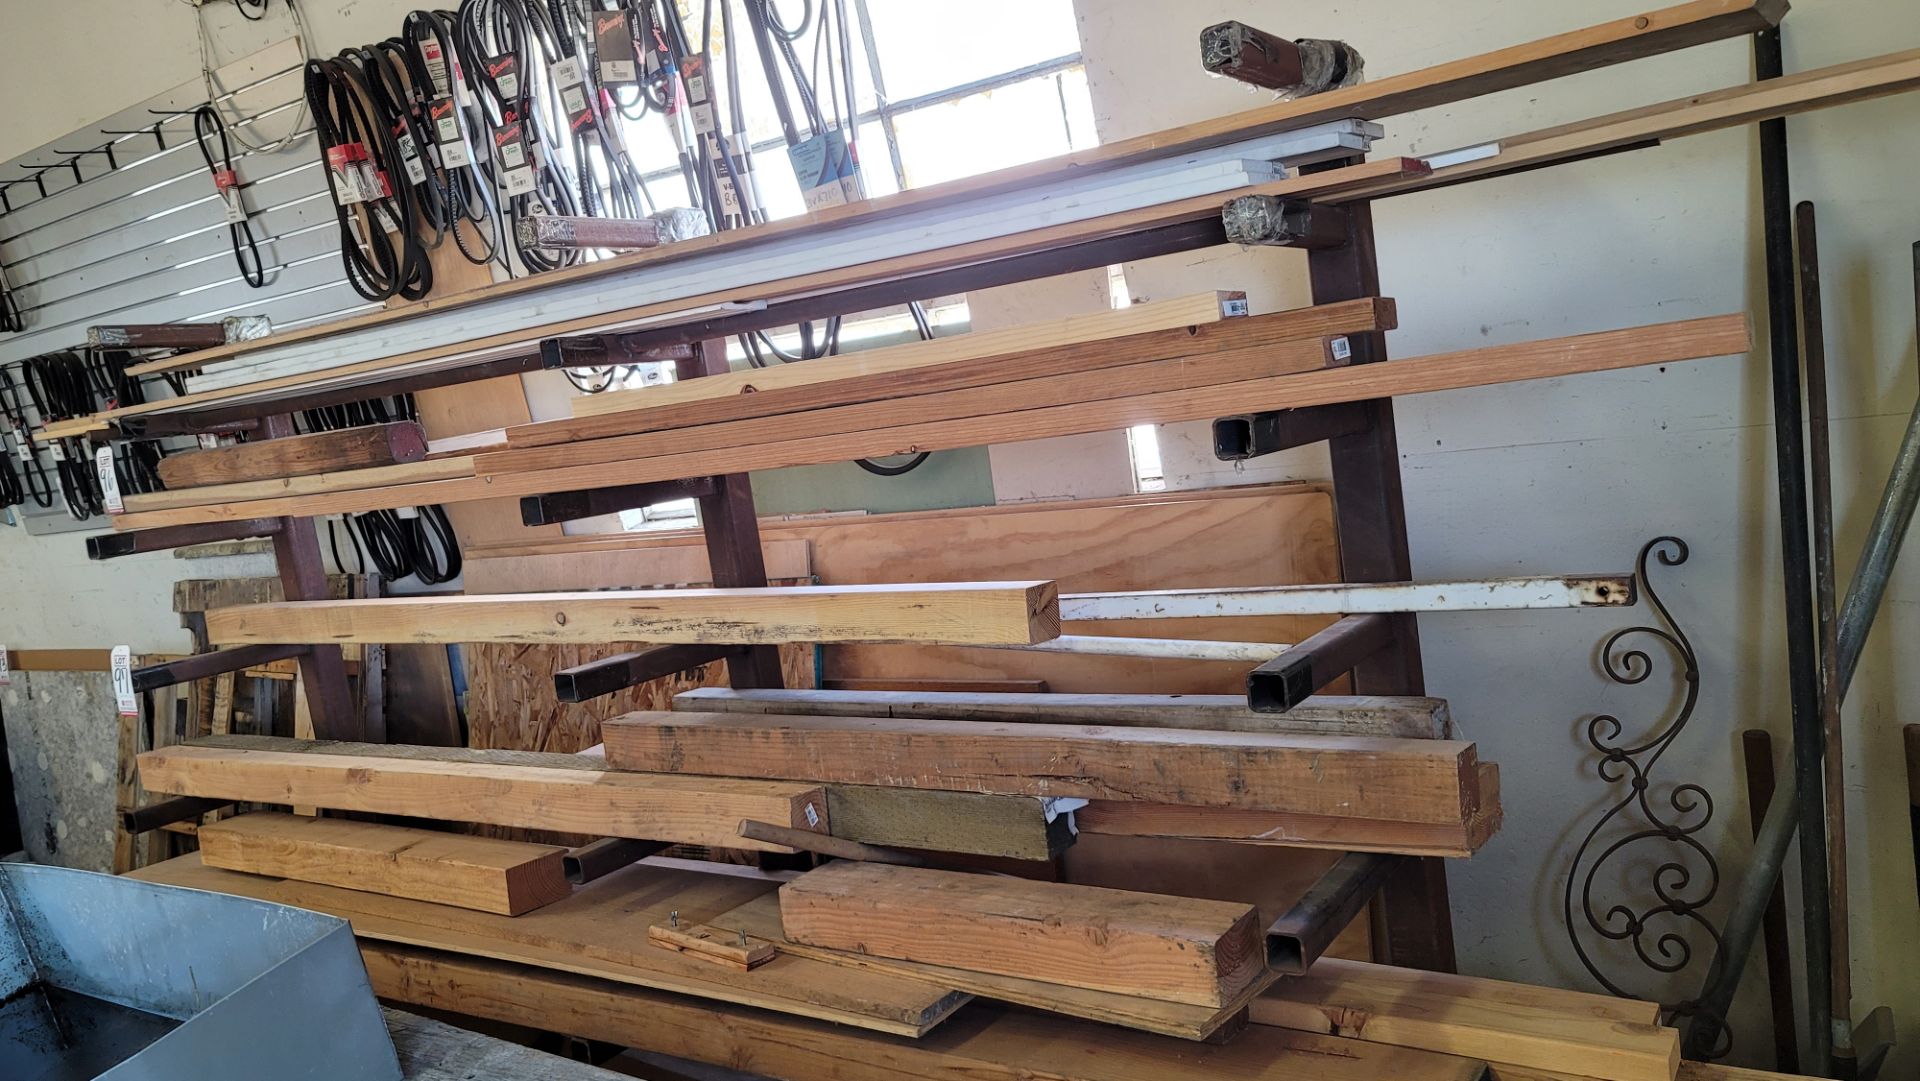 CANTILEVER MATERIAL RACK, 9' WIDE, 18" ARMS, CONTENTS NOT INCLUDED